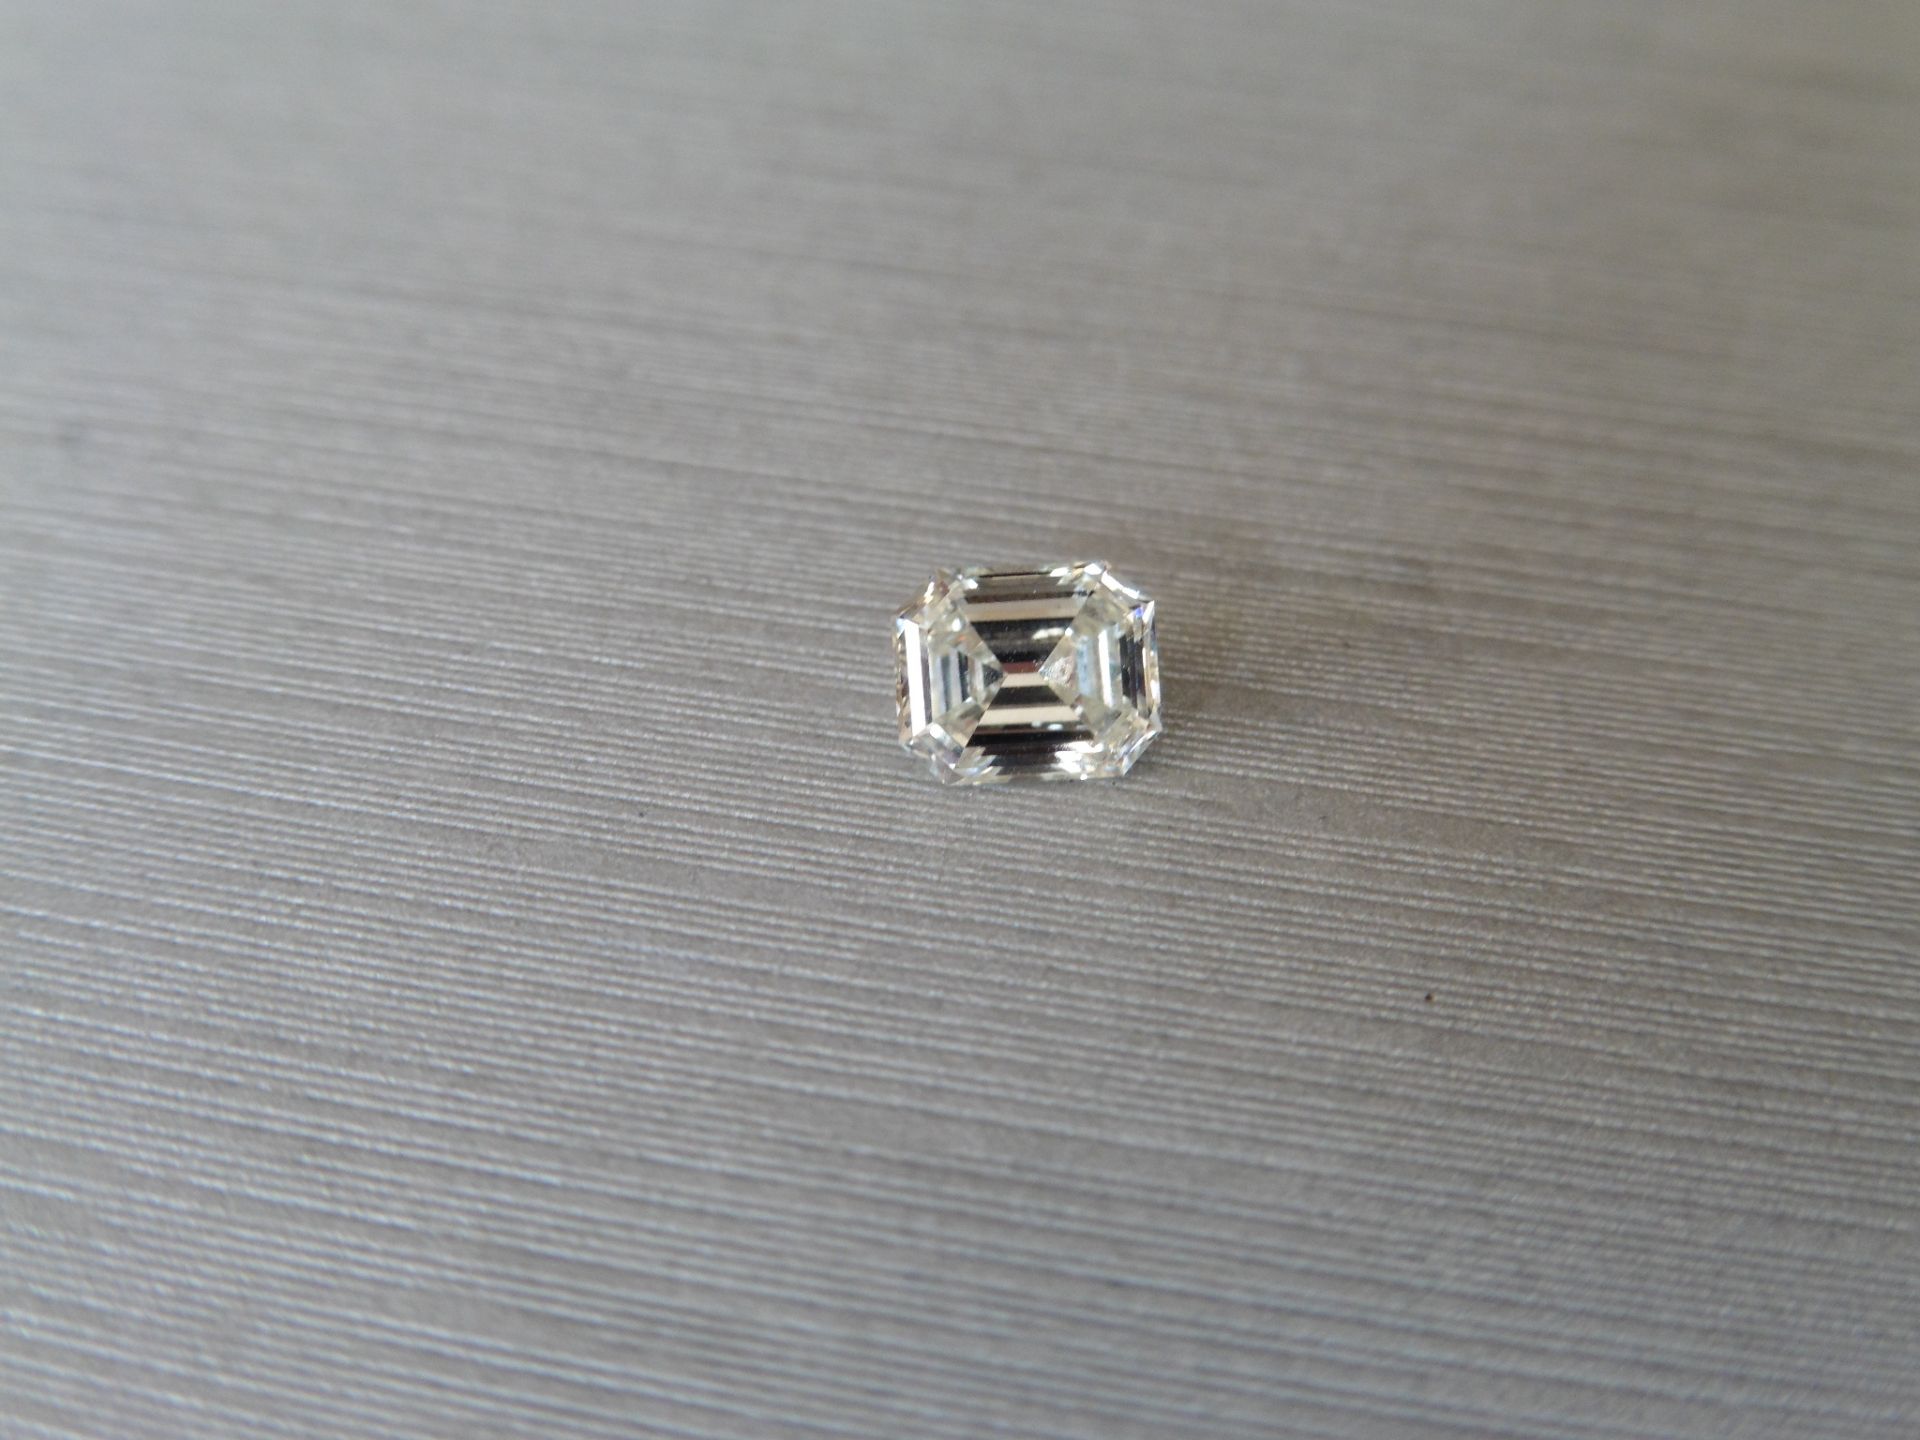 0.92ct single radiant cut diamond. Measures 6.00 x 5.3mm. J colour and VVS clarity. Valued at £6950. - Image 5 of 5